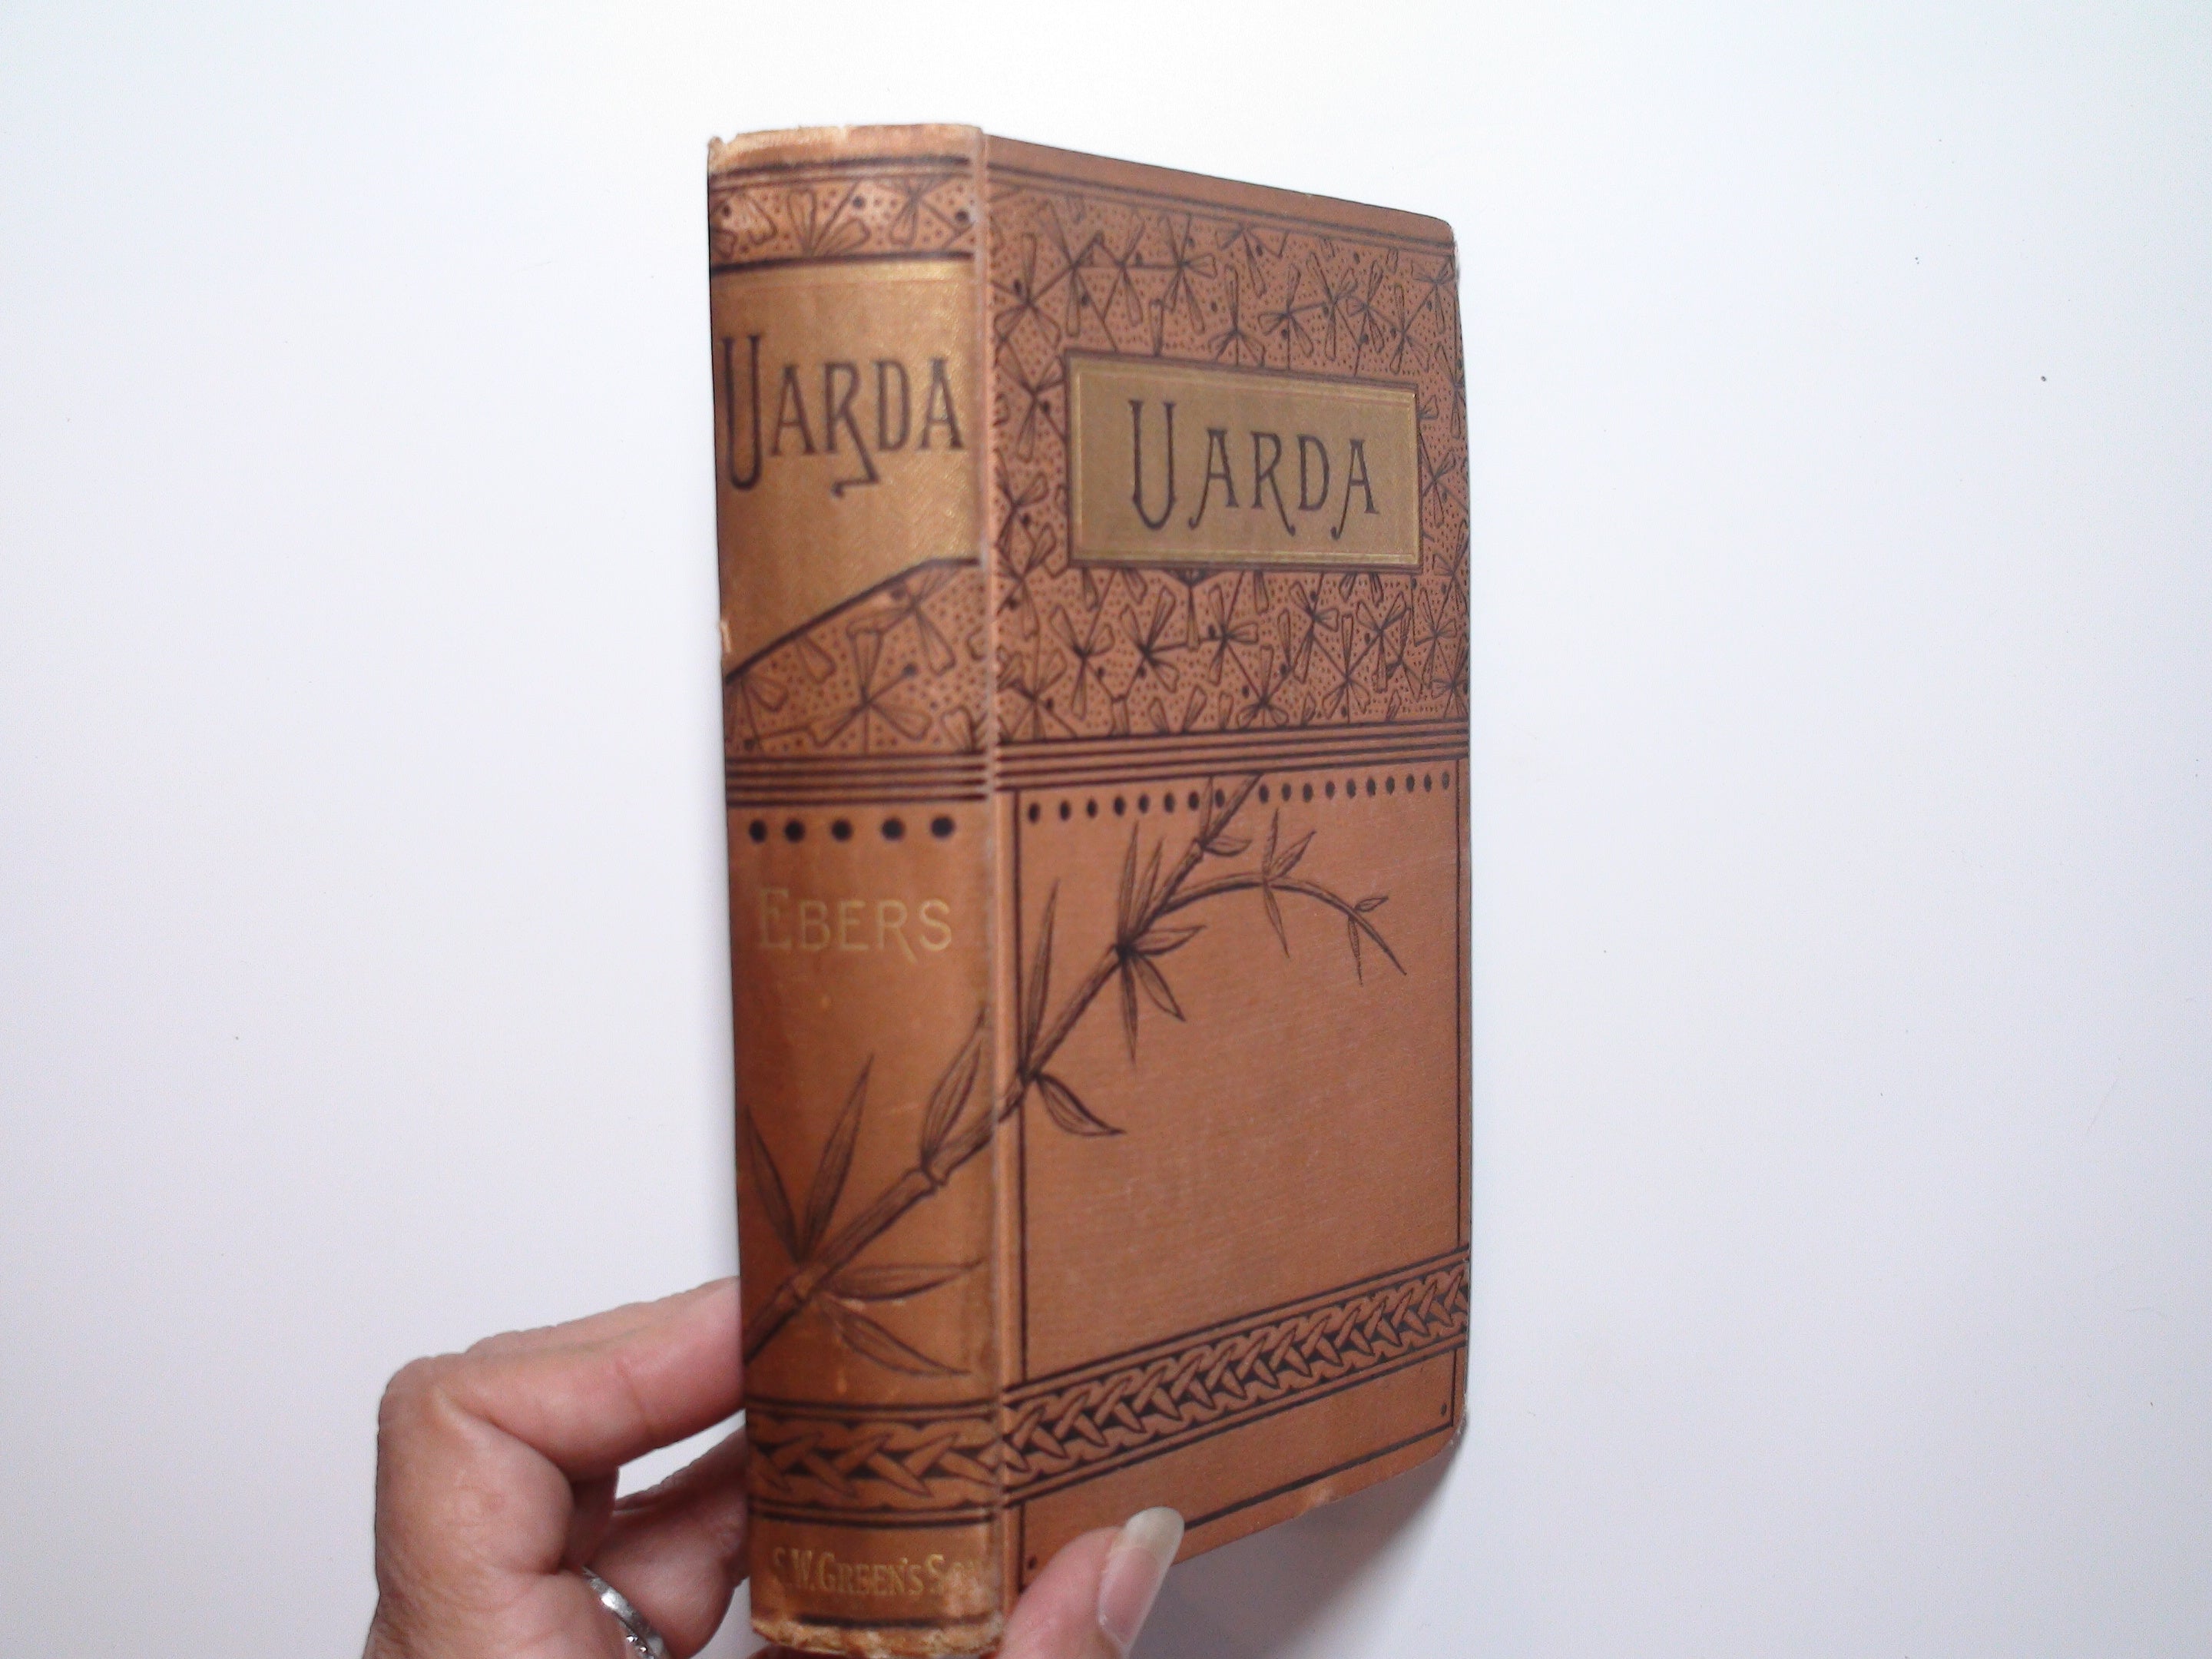 Uarda, A Romance of Ancient Egypt, by George Ebers, Victorian Binding, 1882